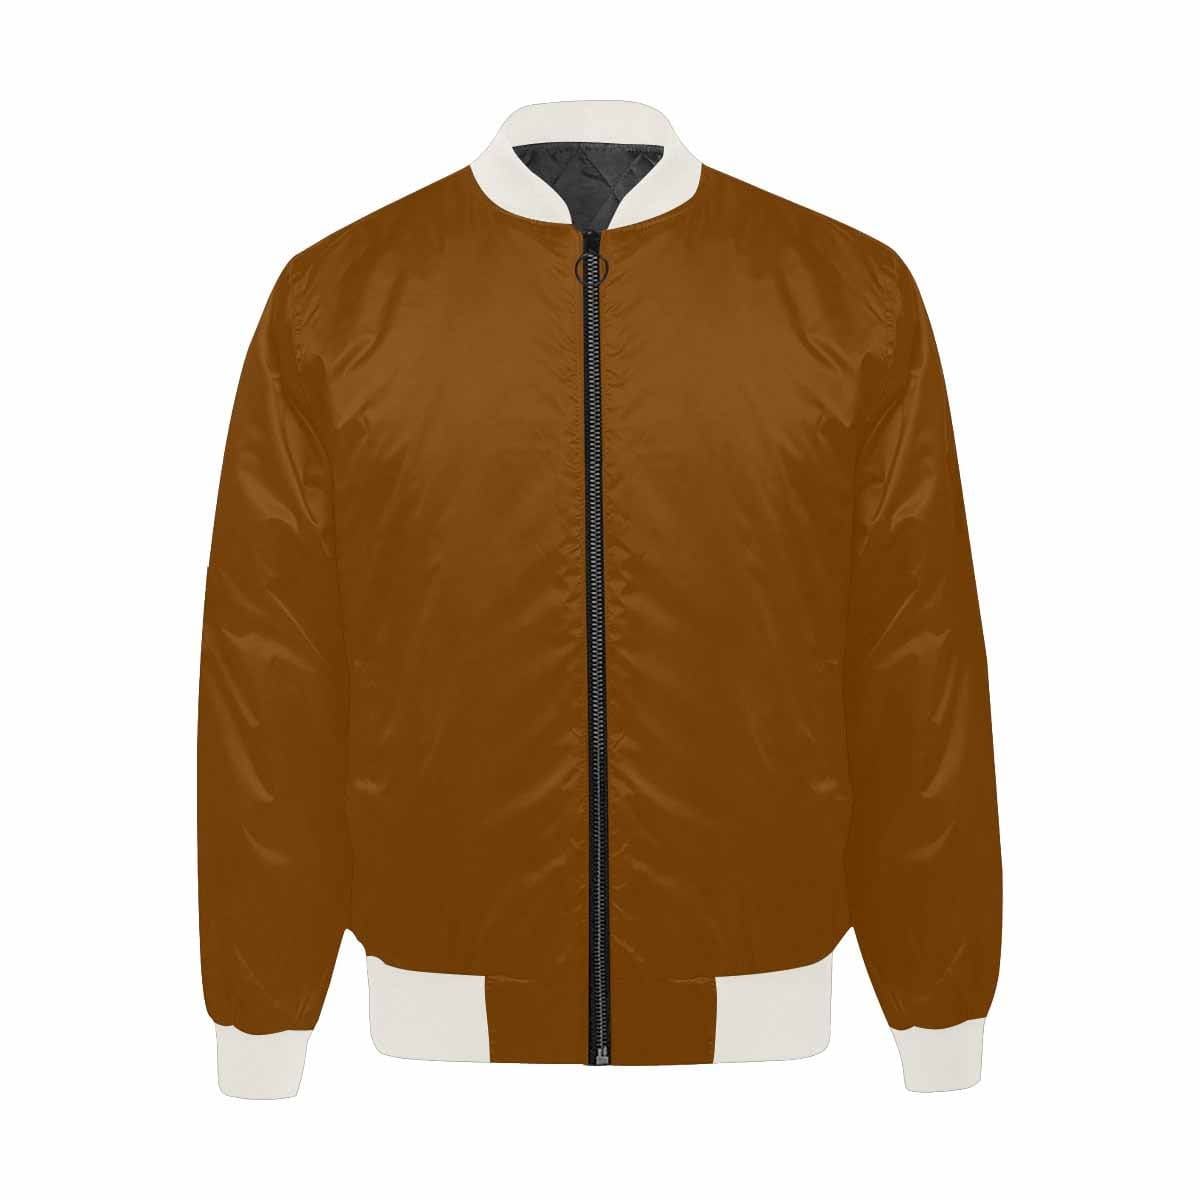 Bomber Jacket For Men Chocolate Brown - Mens | Jackets | Bombers